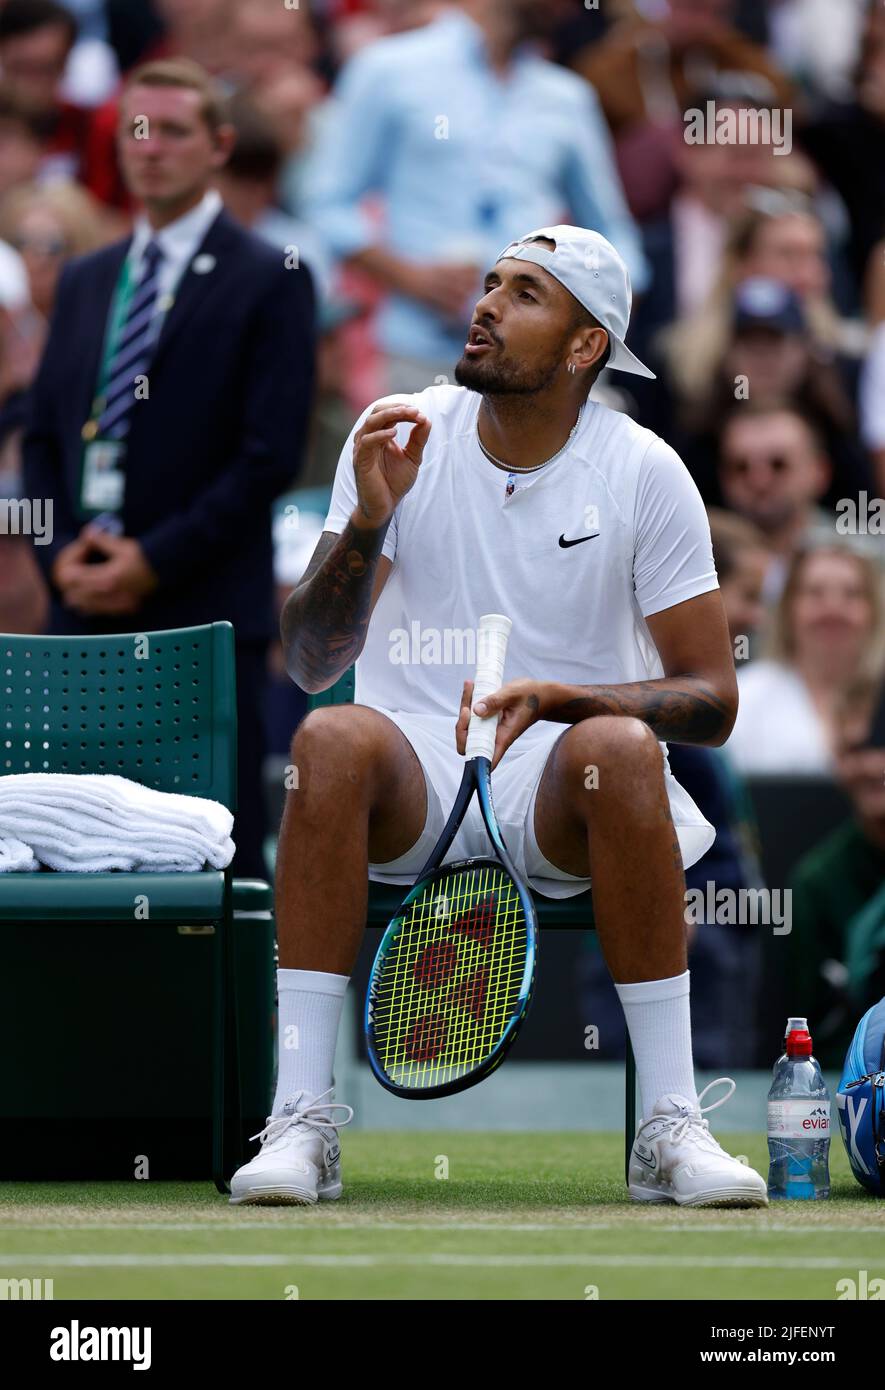 Nick Kyrgios reacts during his Men's Singles third round match against Stefanos Tsitsipas during day six of the 2022 Wimbledon Championships at the All England Lawn Tennis and Croquet Club, Wimbledon. Picture date: Saturday July 2, 2022. Stock Photo